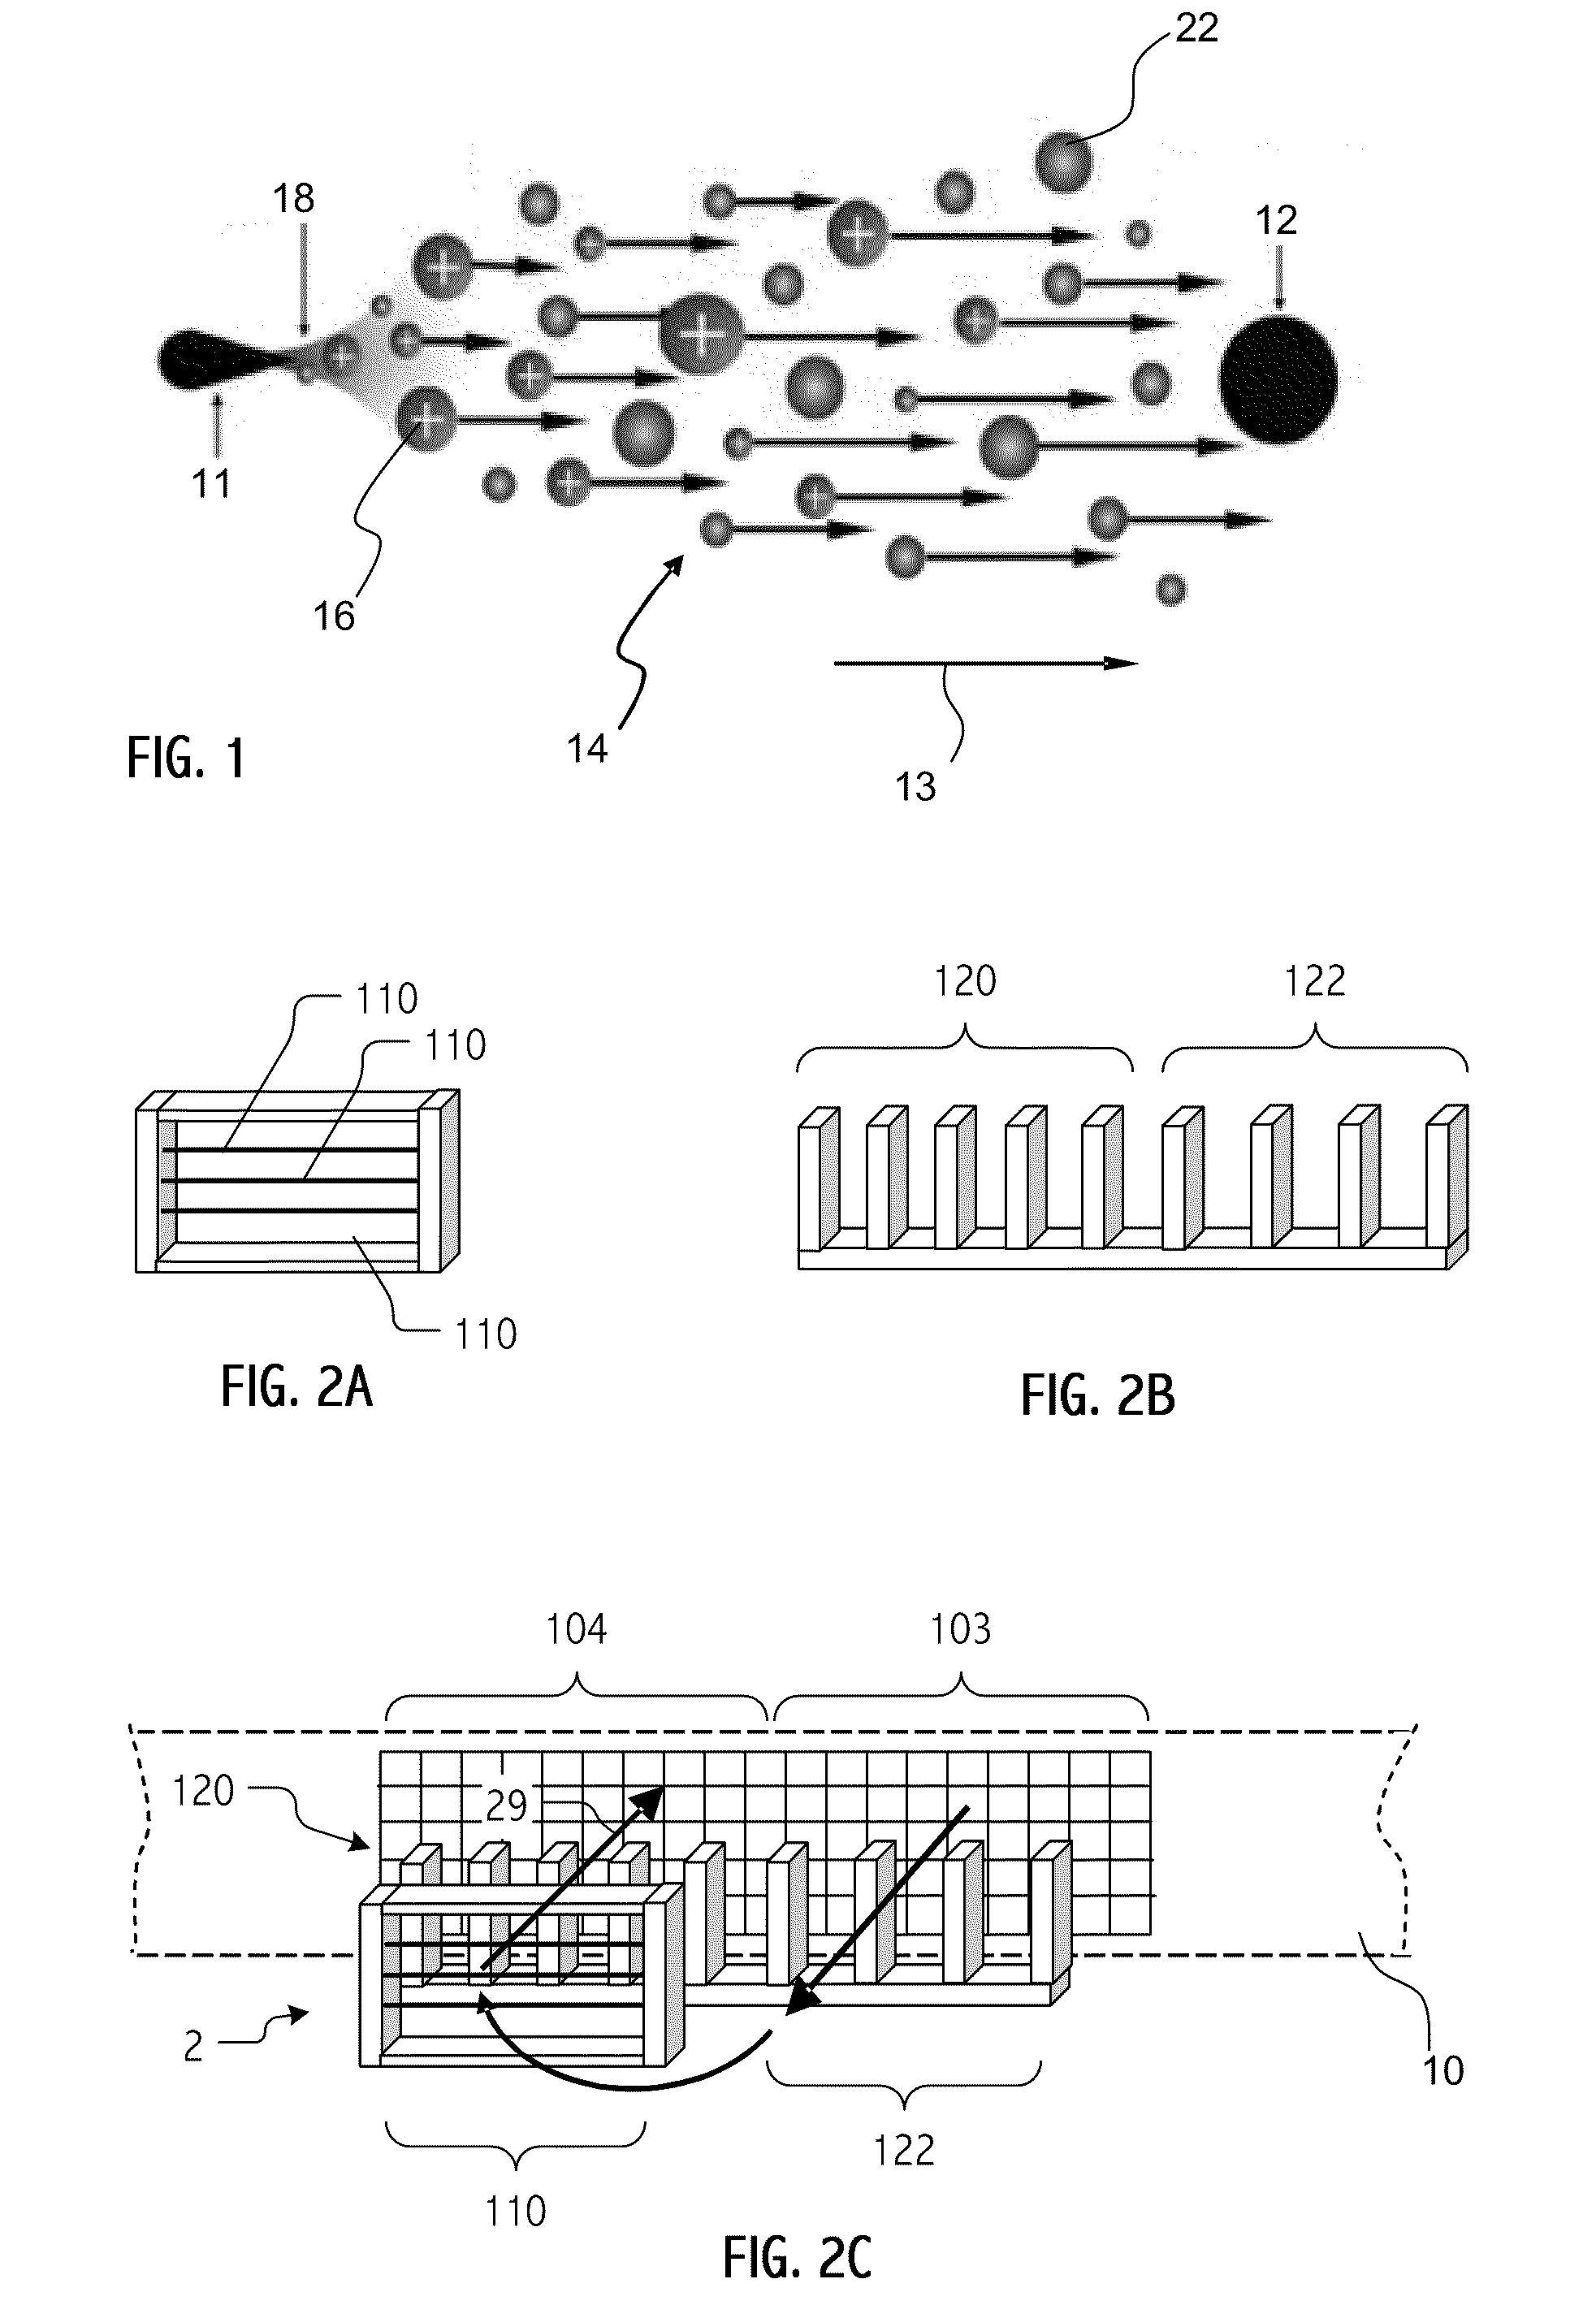 Spatially distributed ventilation boundary using electrohydrodynamic fluid accelerators